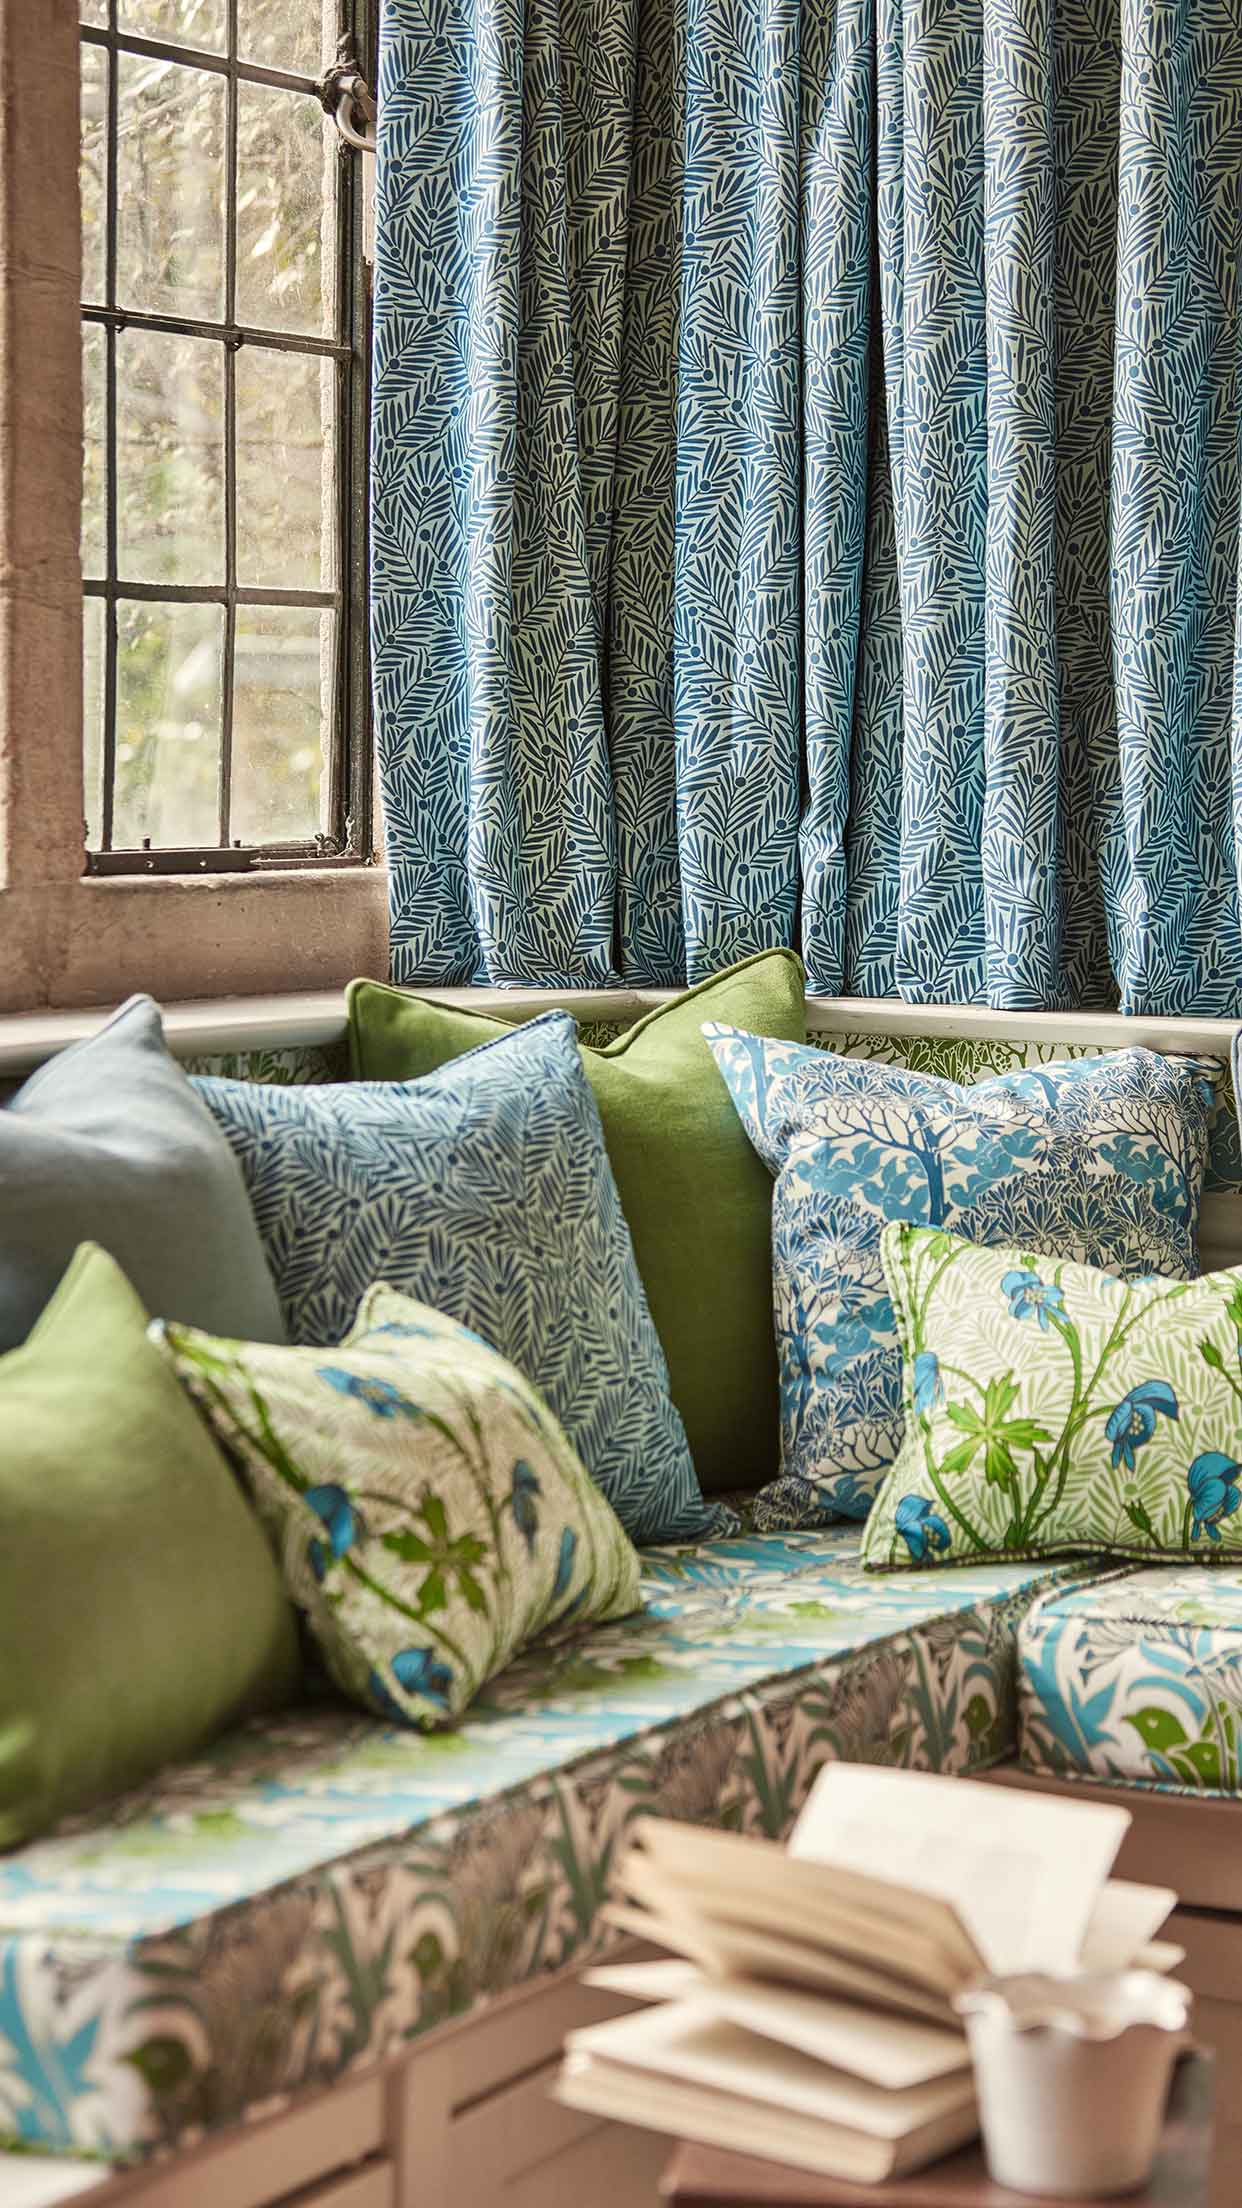 Morris & Co Bedford Park Wallpaper & Fabric Collection | Featuring an arts & crafts style living room with feature fabrics in a botanical prints